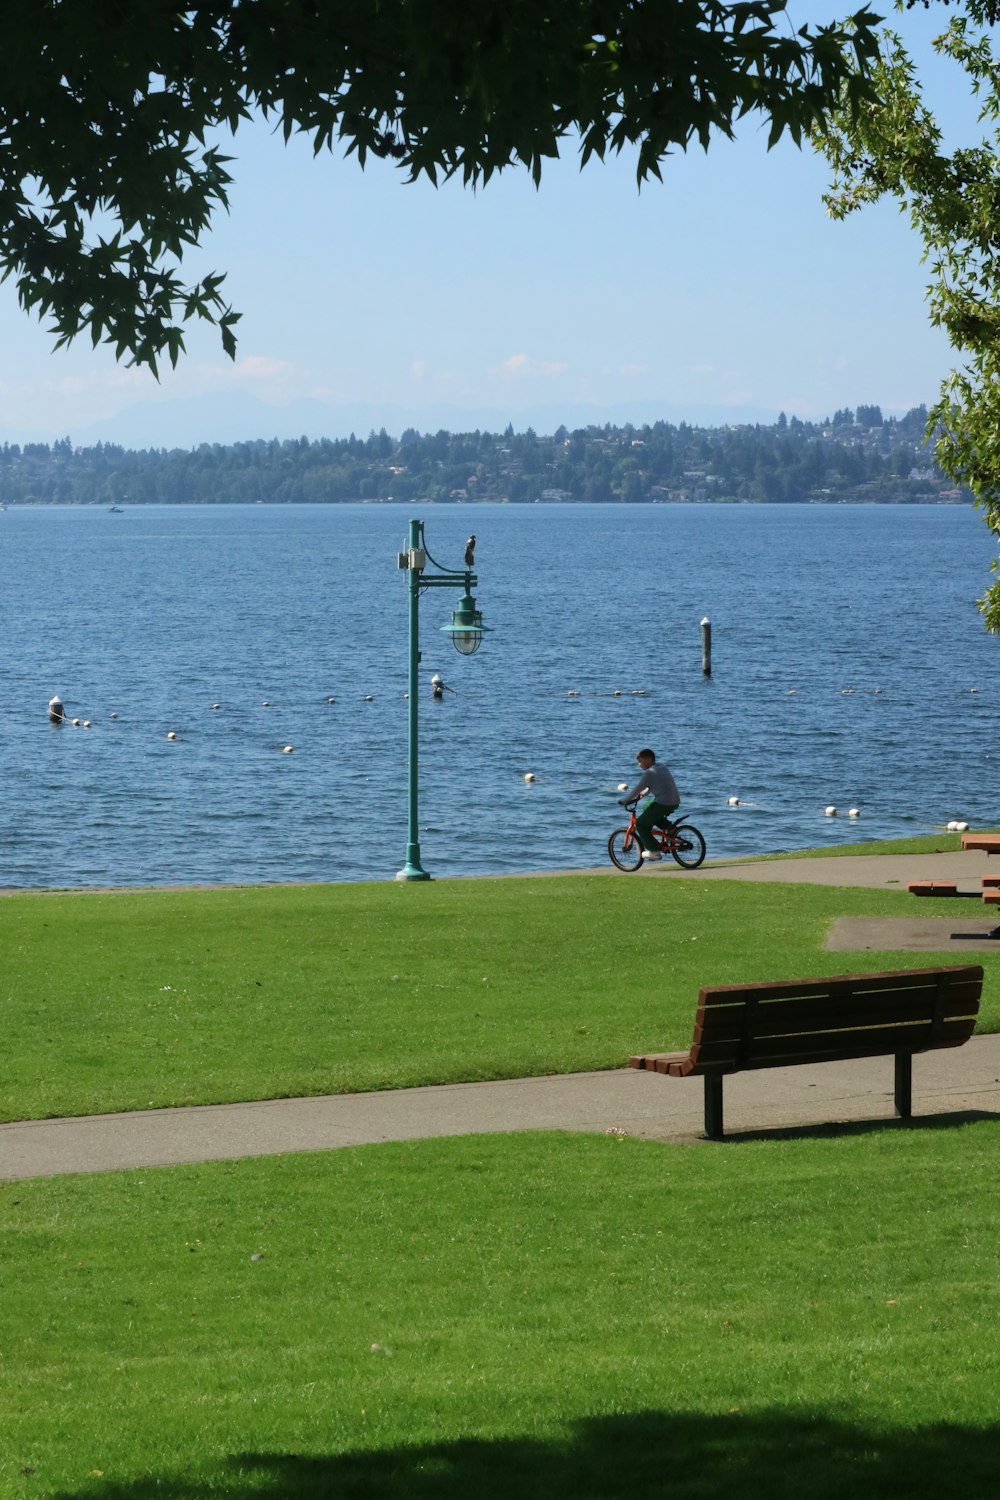 a person riding a bike on a path near the water